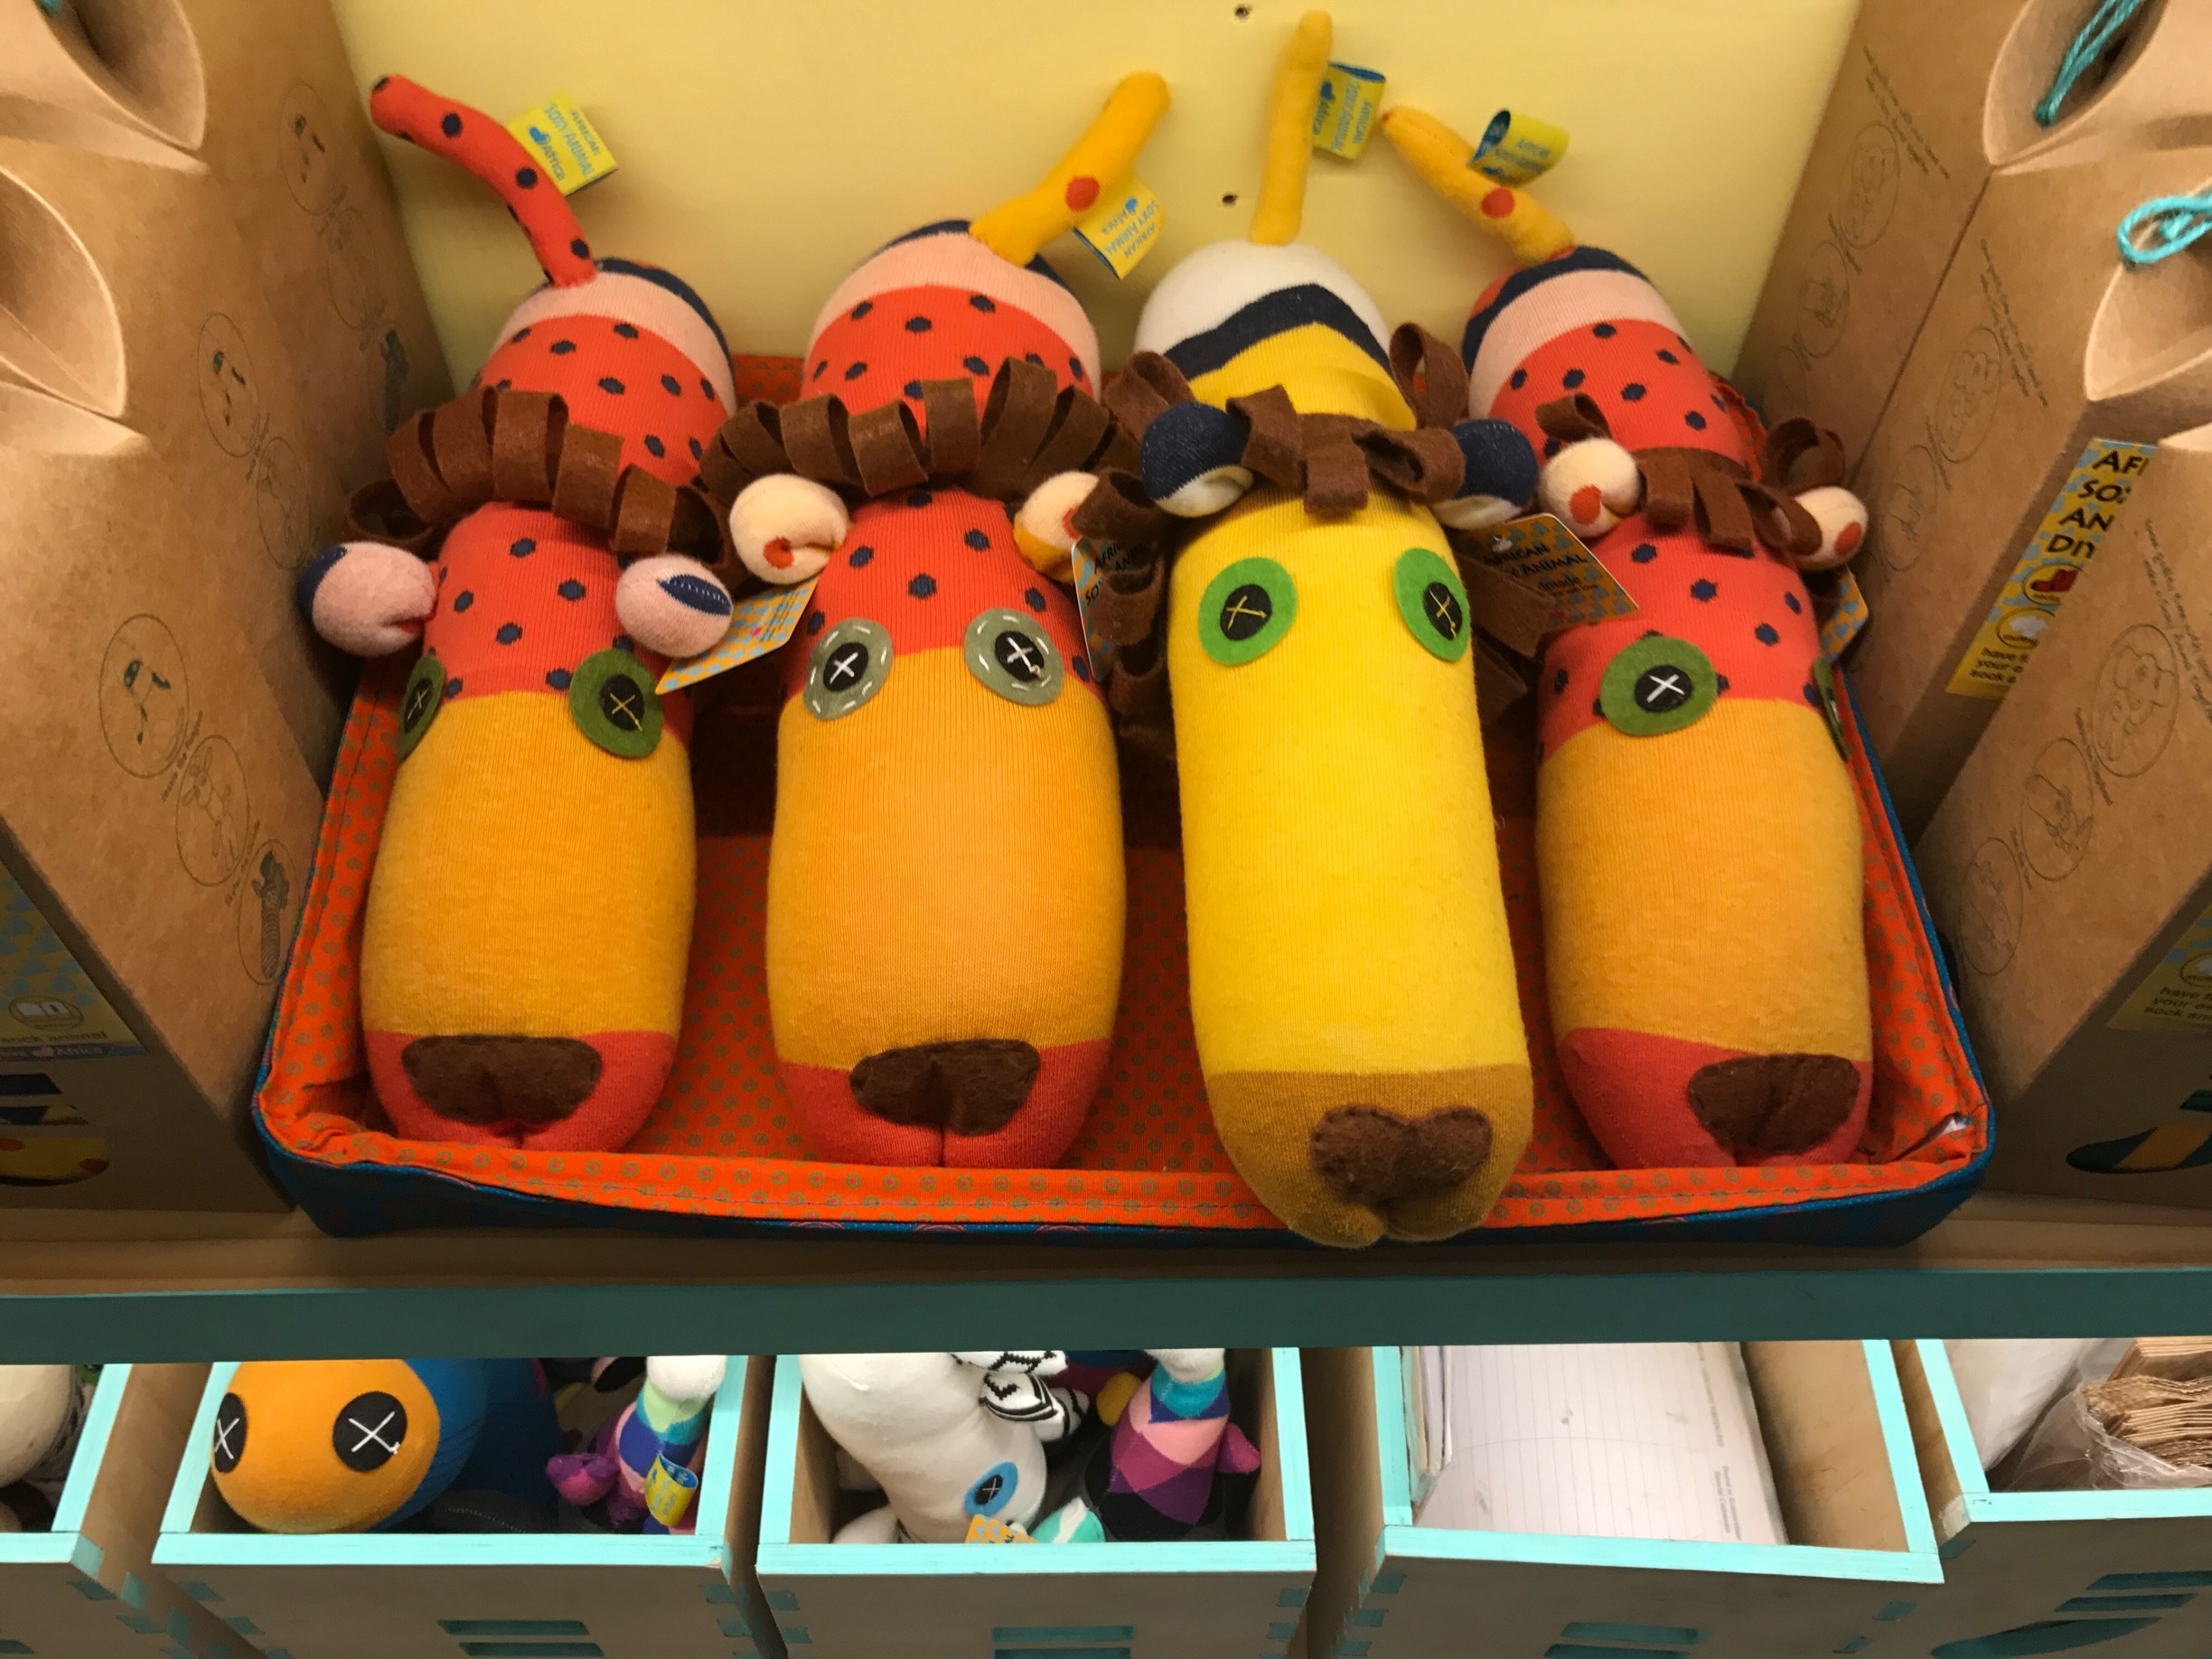 African Soxy Animals! Cute and great gift for little ones!